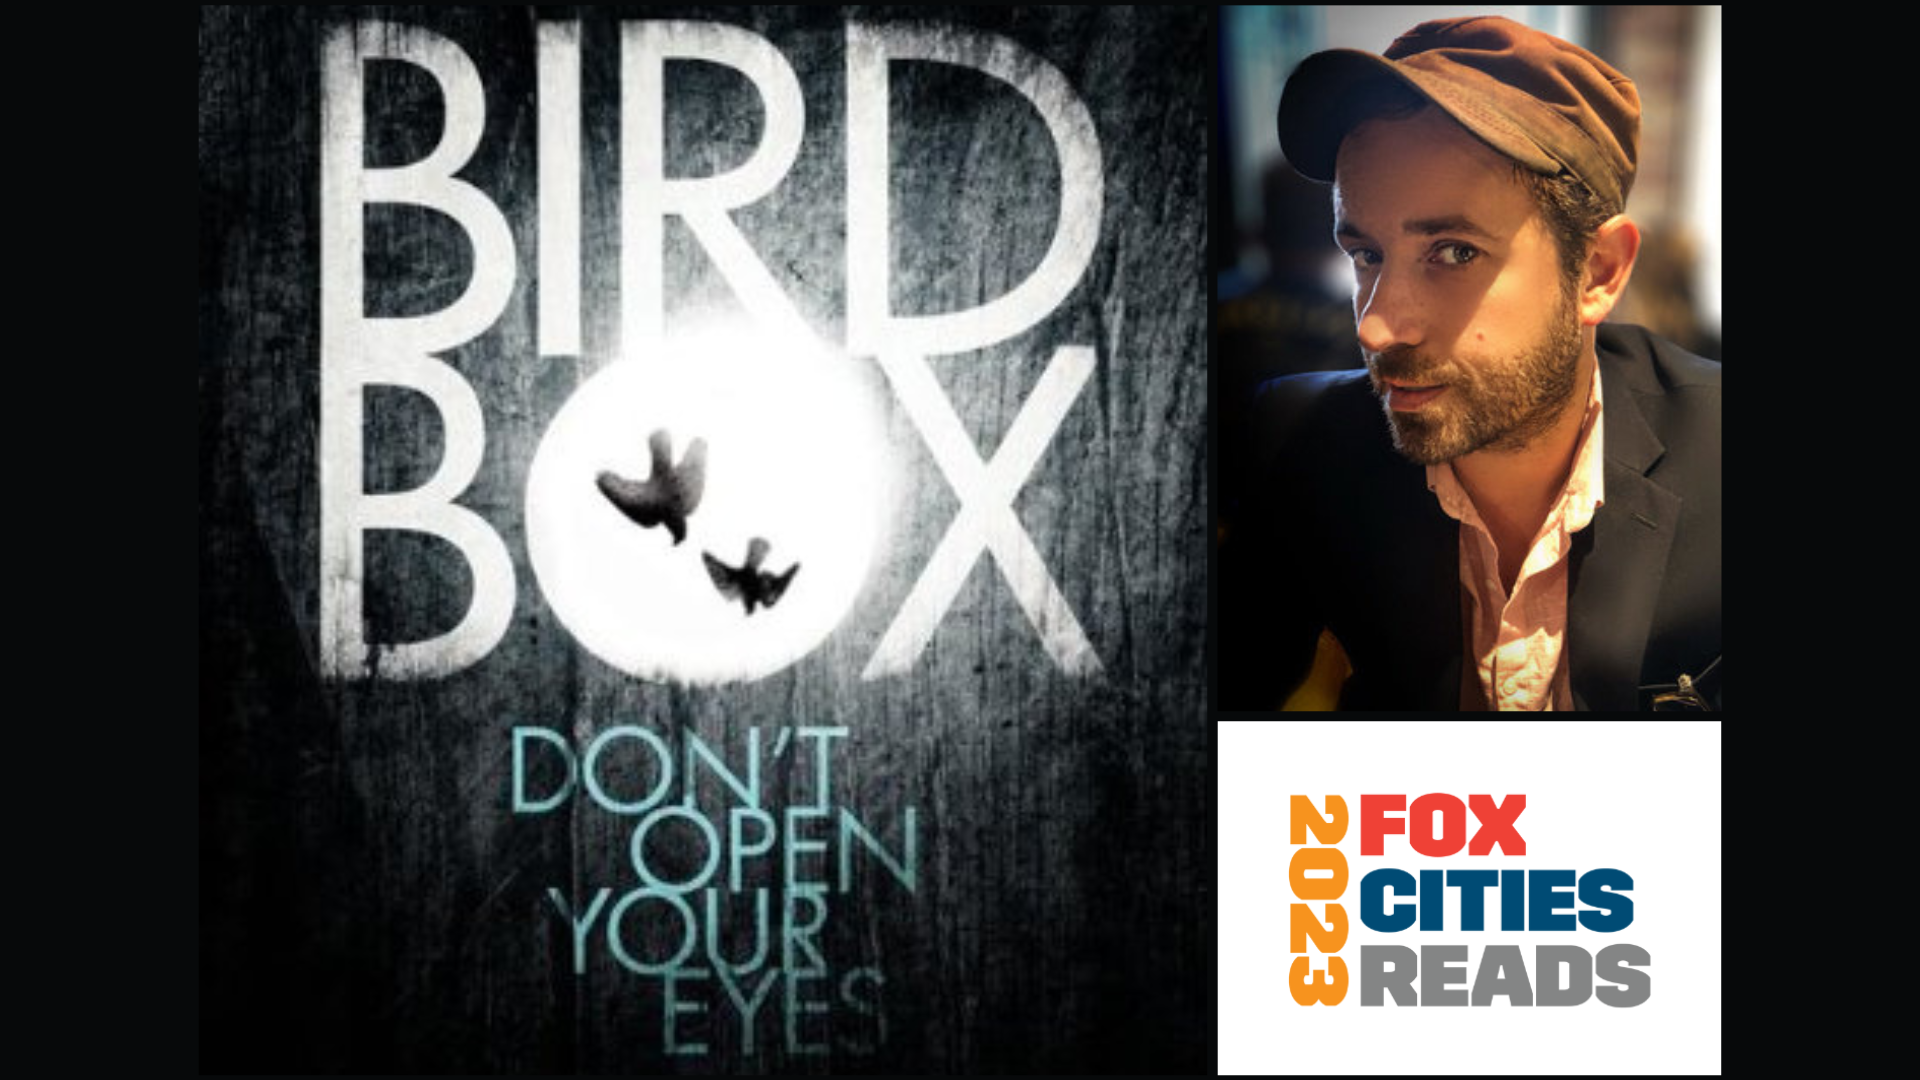 Image of the book Bird Box and image of the author, Josh Malerman with 2023 Fox Cities Reads logo.